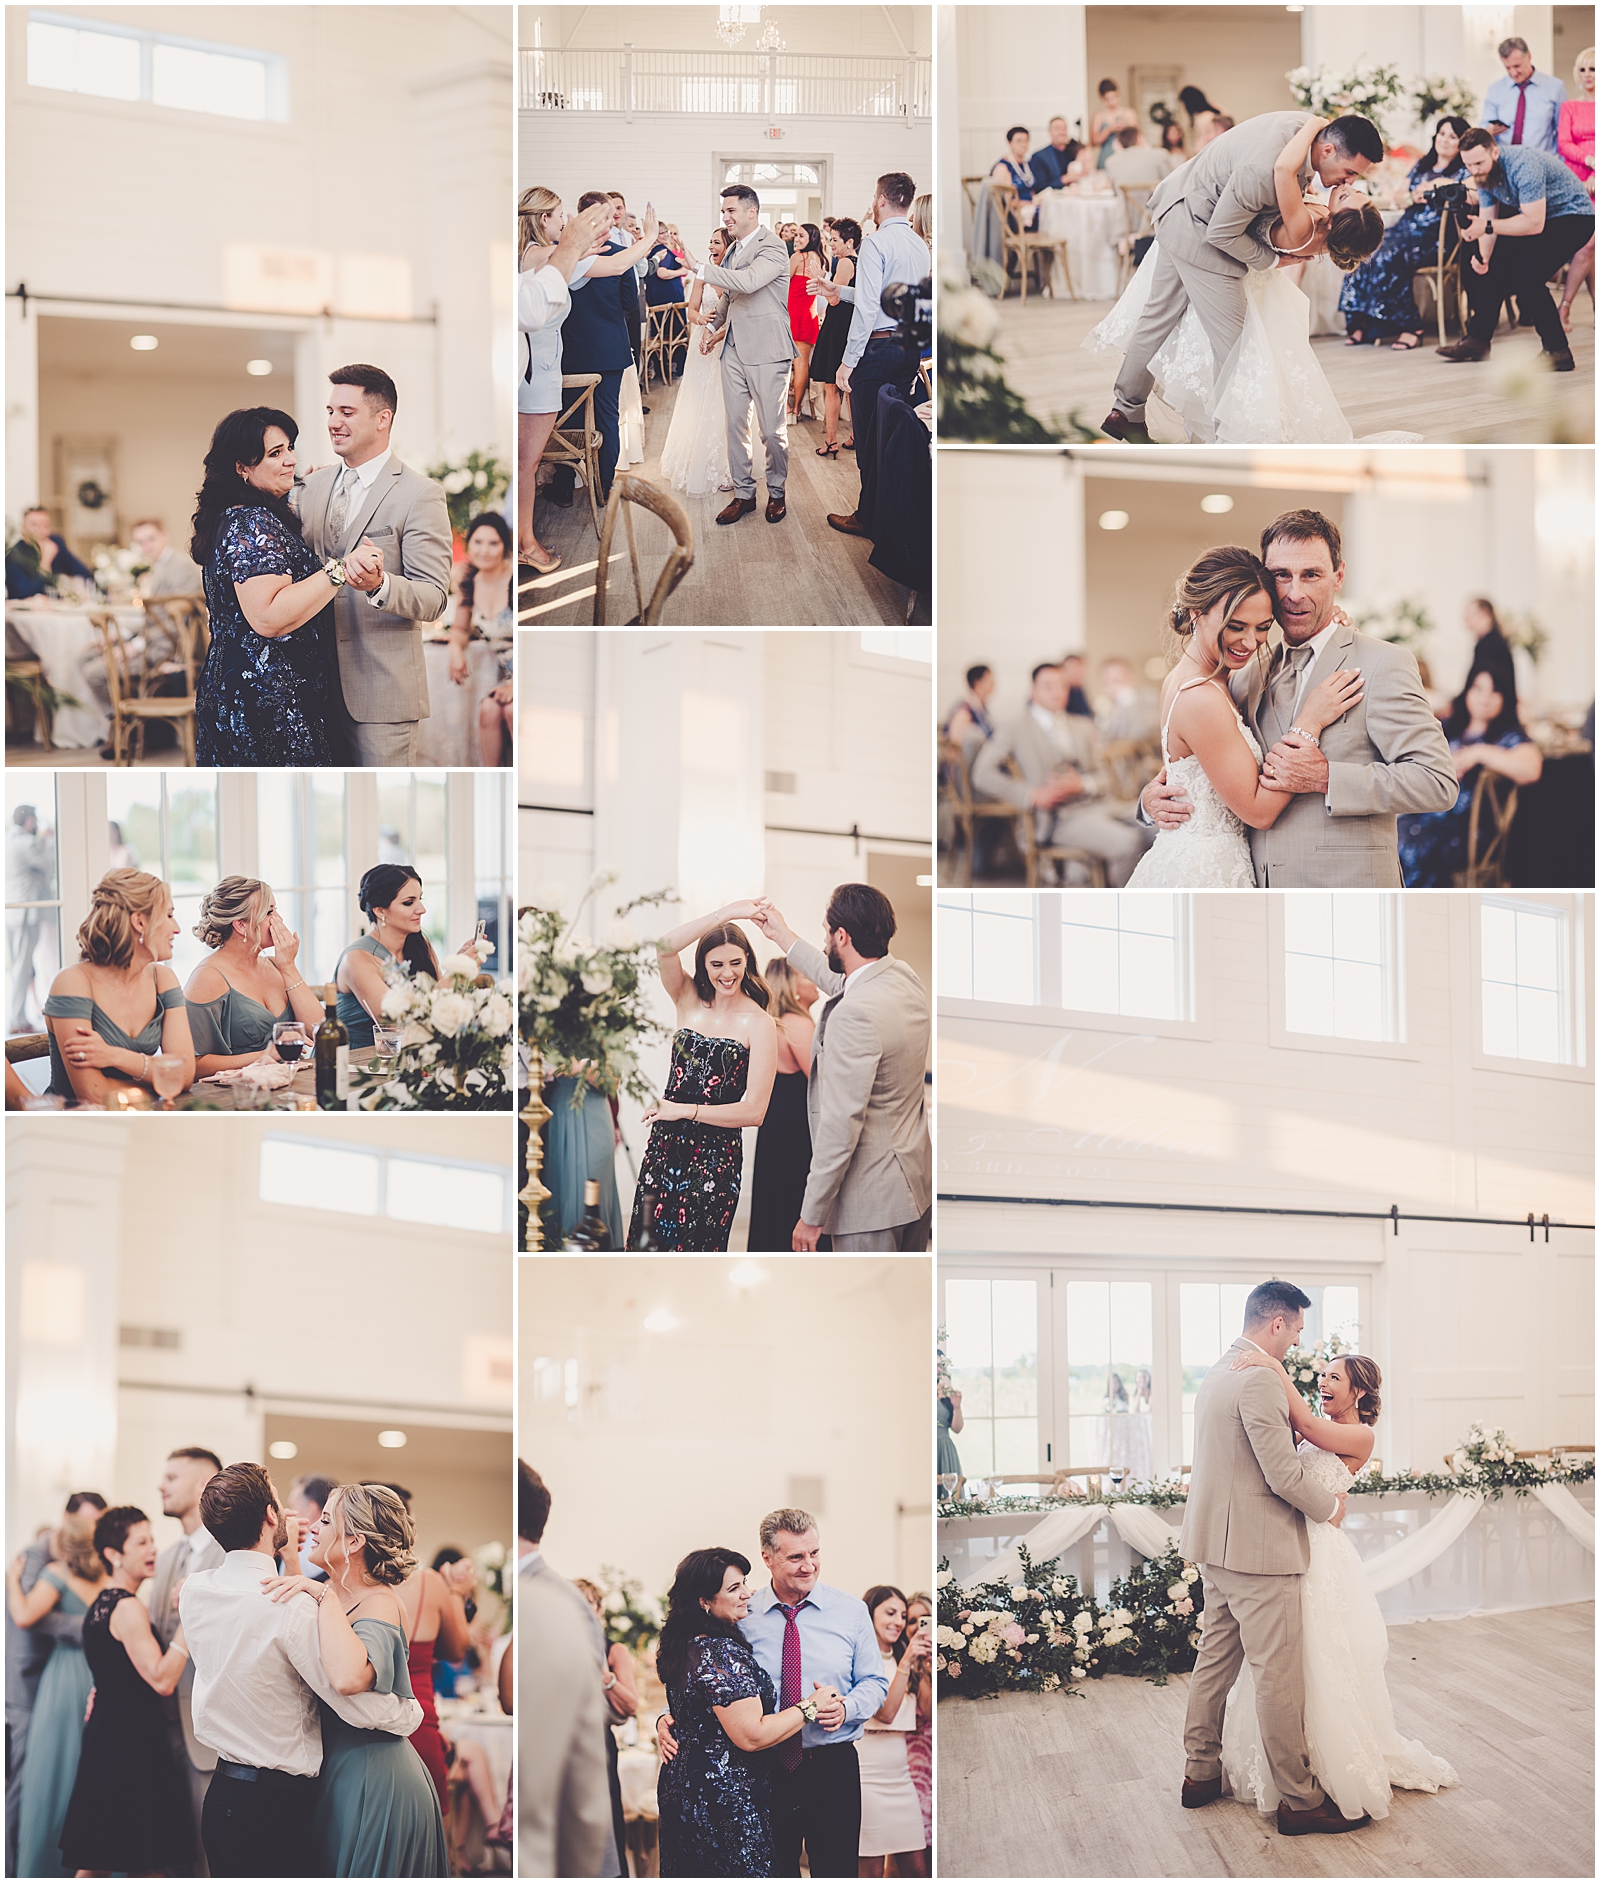 Emily and Milan's romantic summer wedding at Providence Vineyard in Hebron, IL with Chicagoland wedding Photographer Kara Evans Photographer.